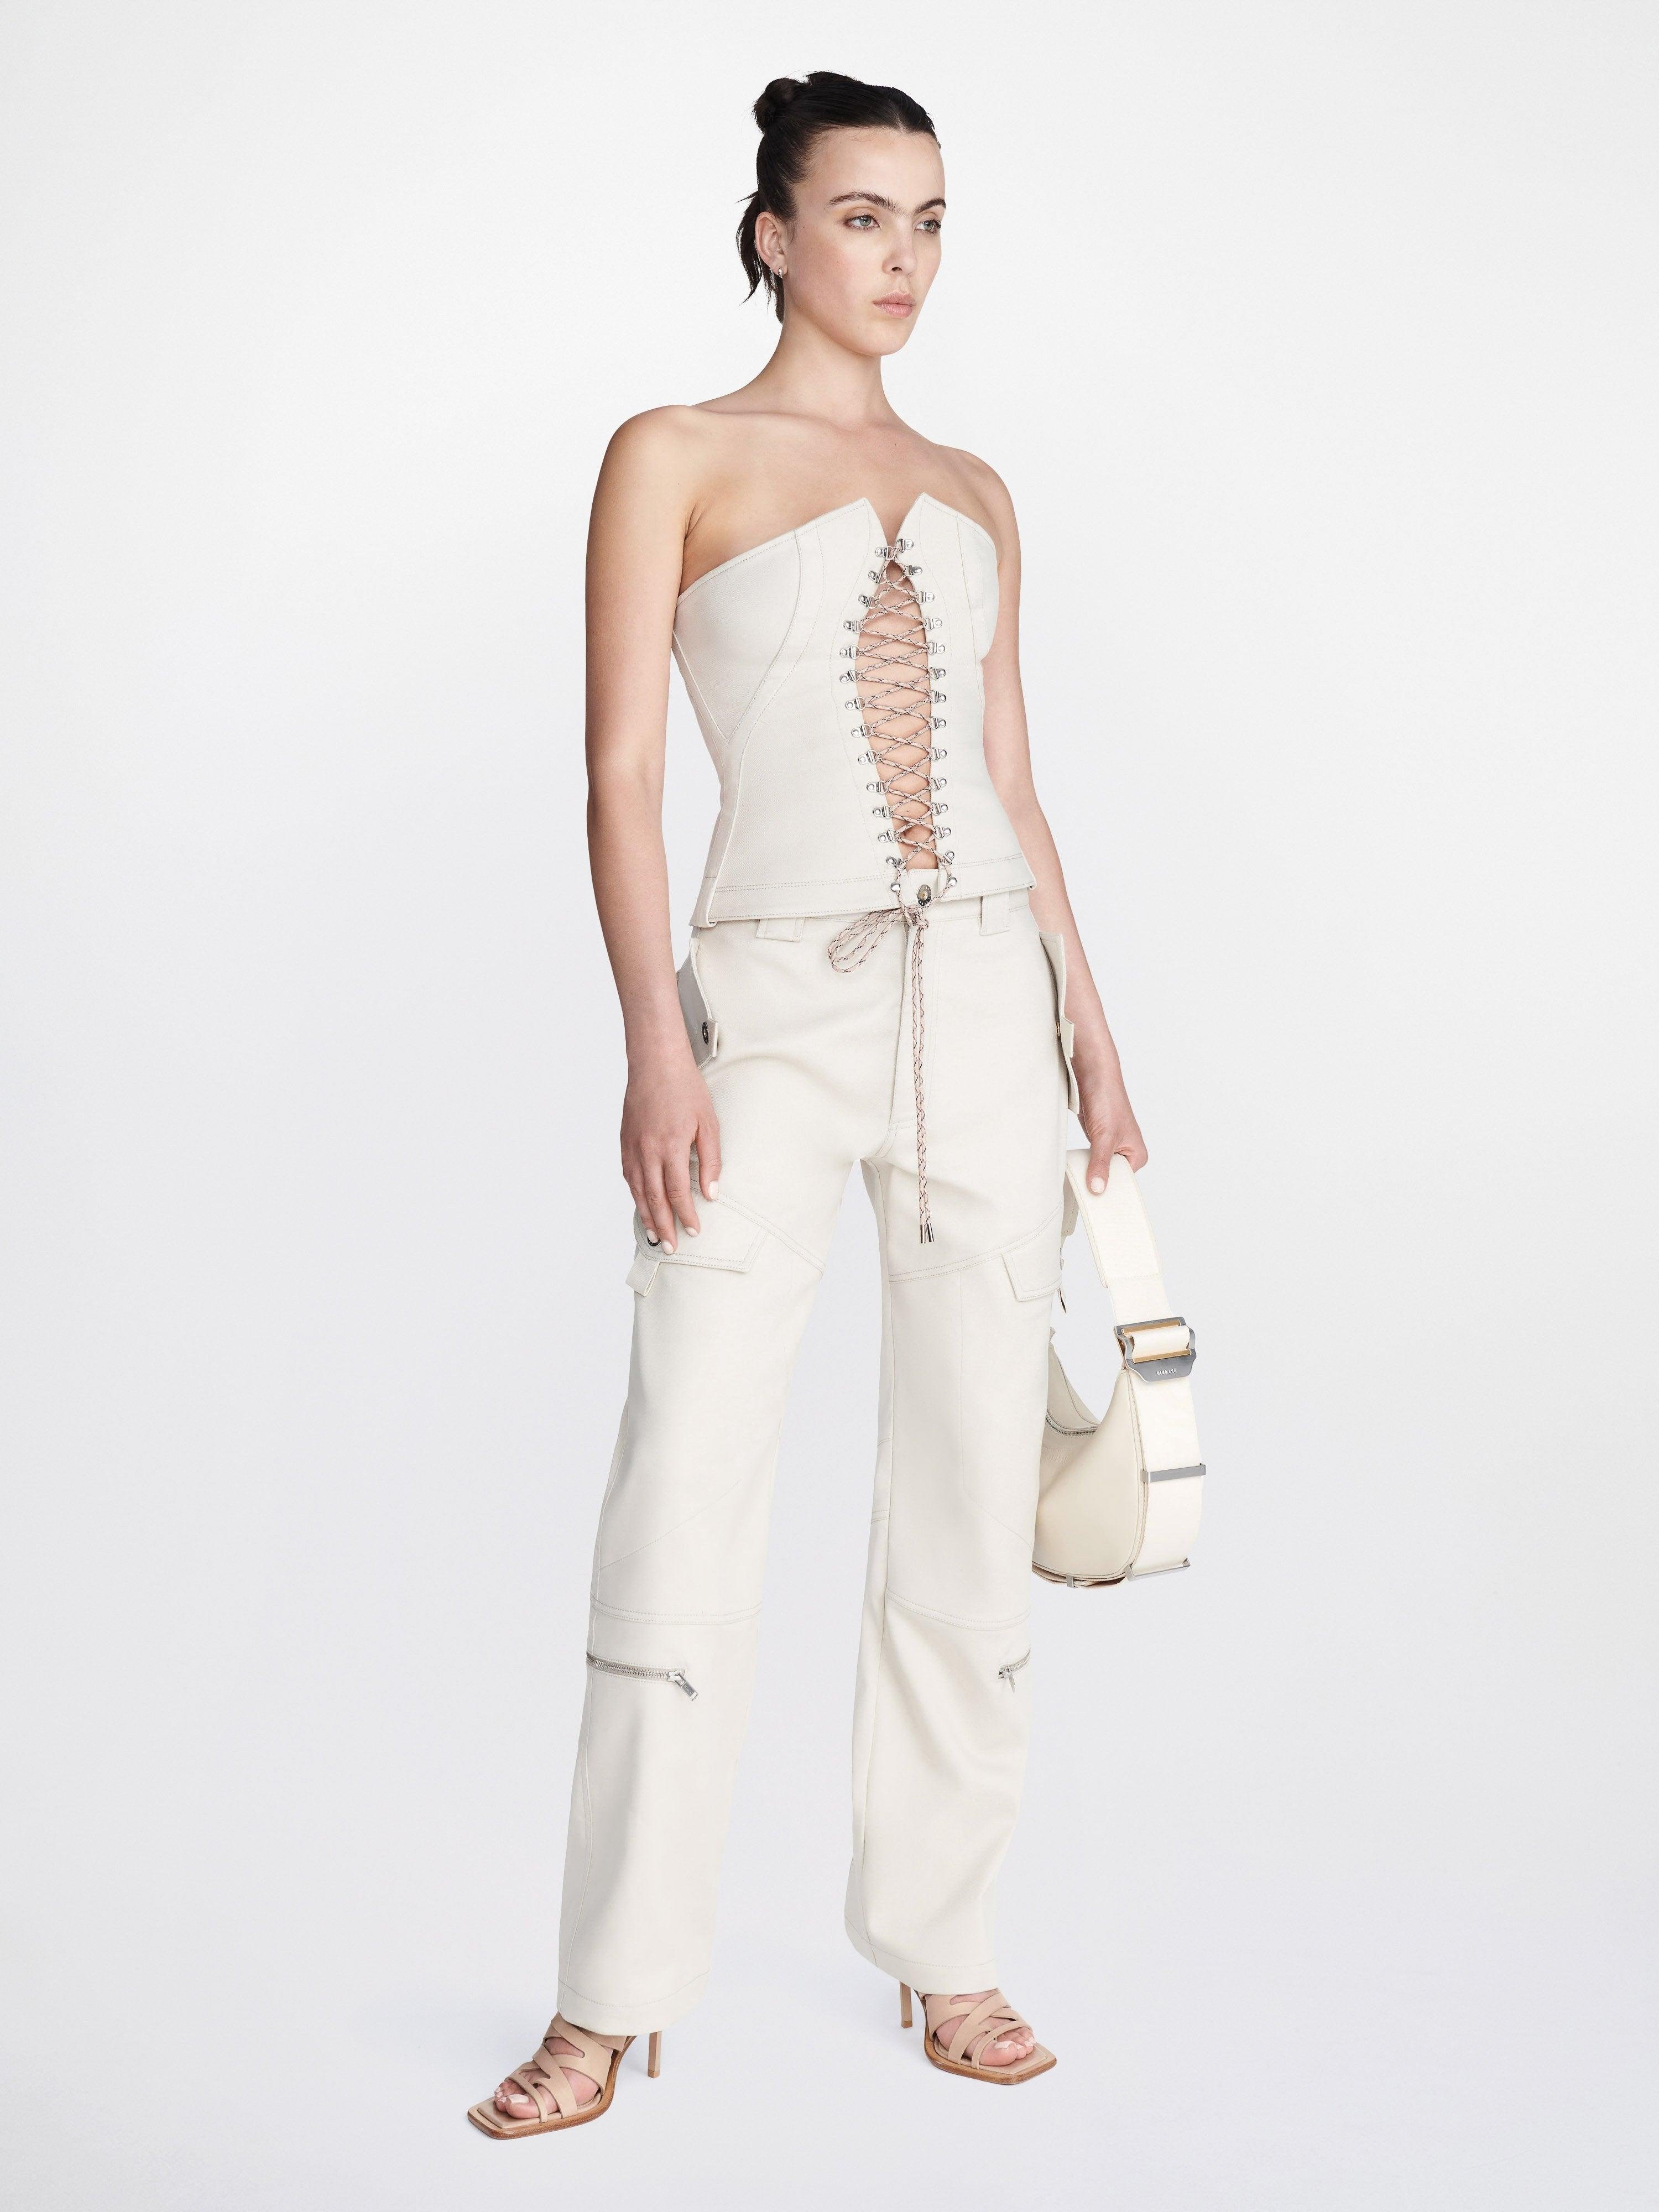 HIKING LACED CORSET by DION LEE